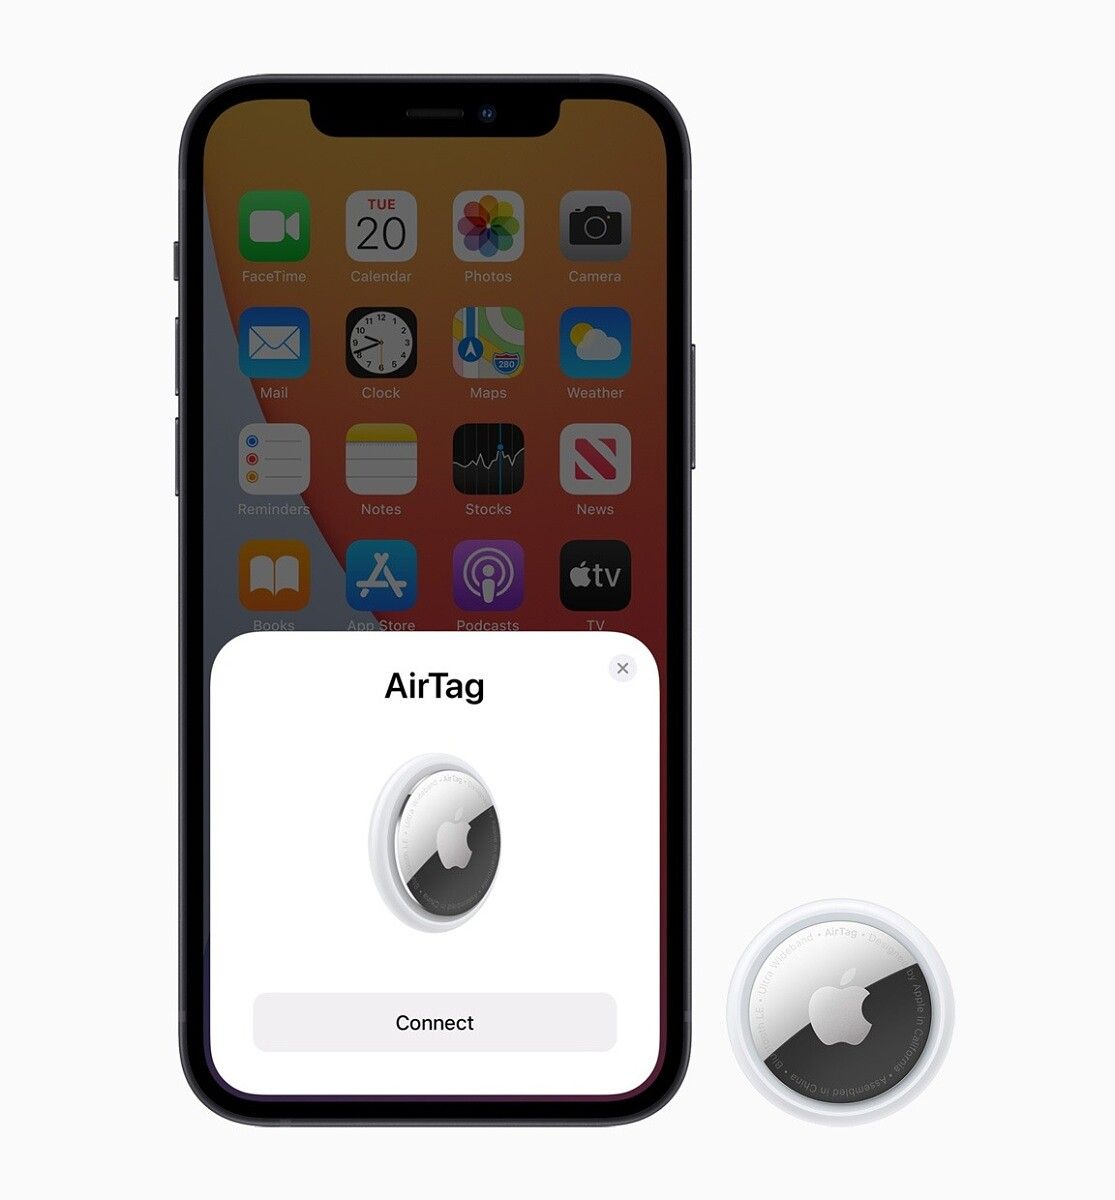 The AirTag is a Find My network tracker that offers plenty of features to ensure not losing your items.